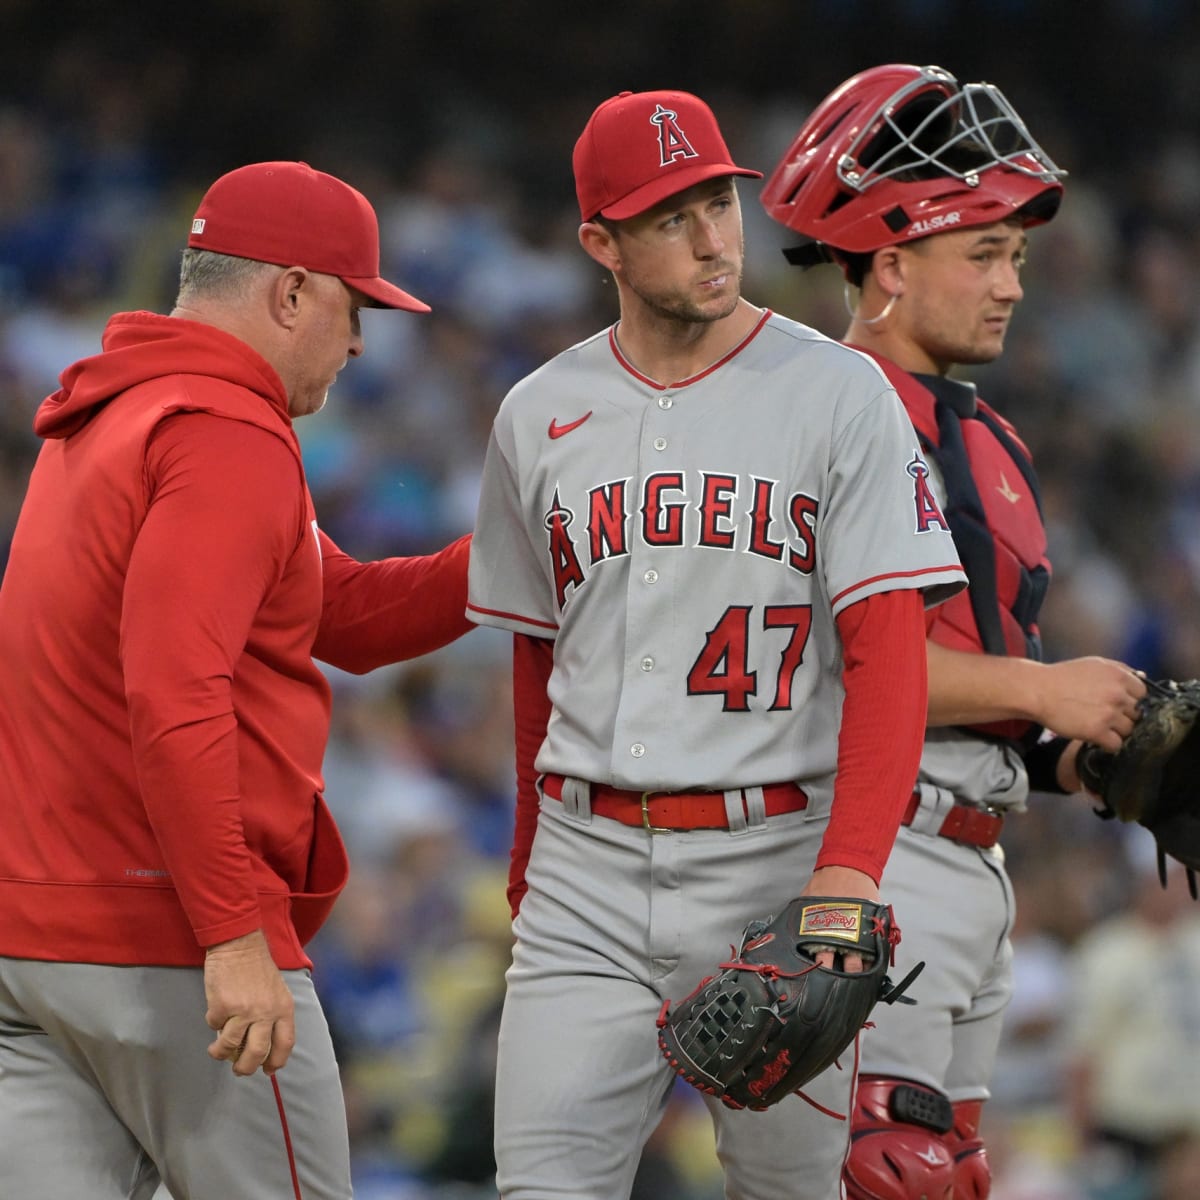 Los Angeles Angels C.J. Cron is coming into his own